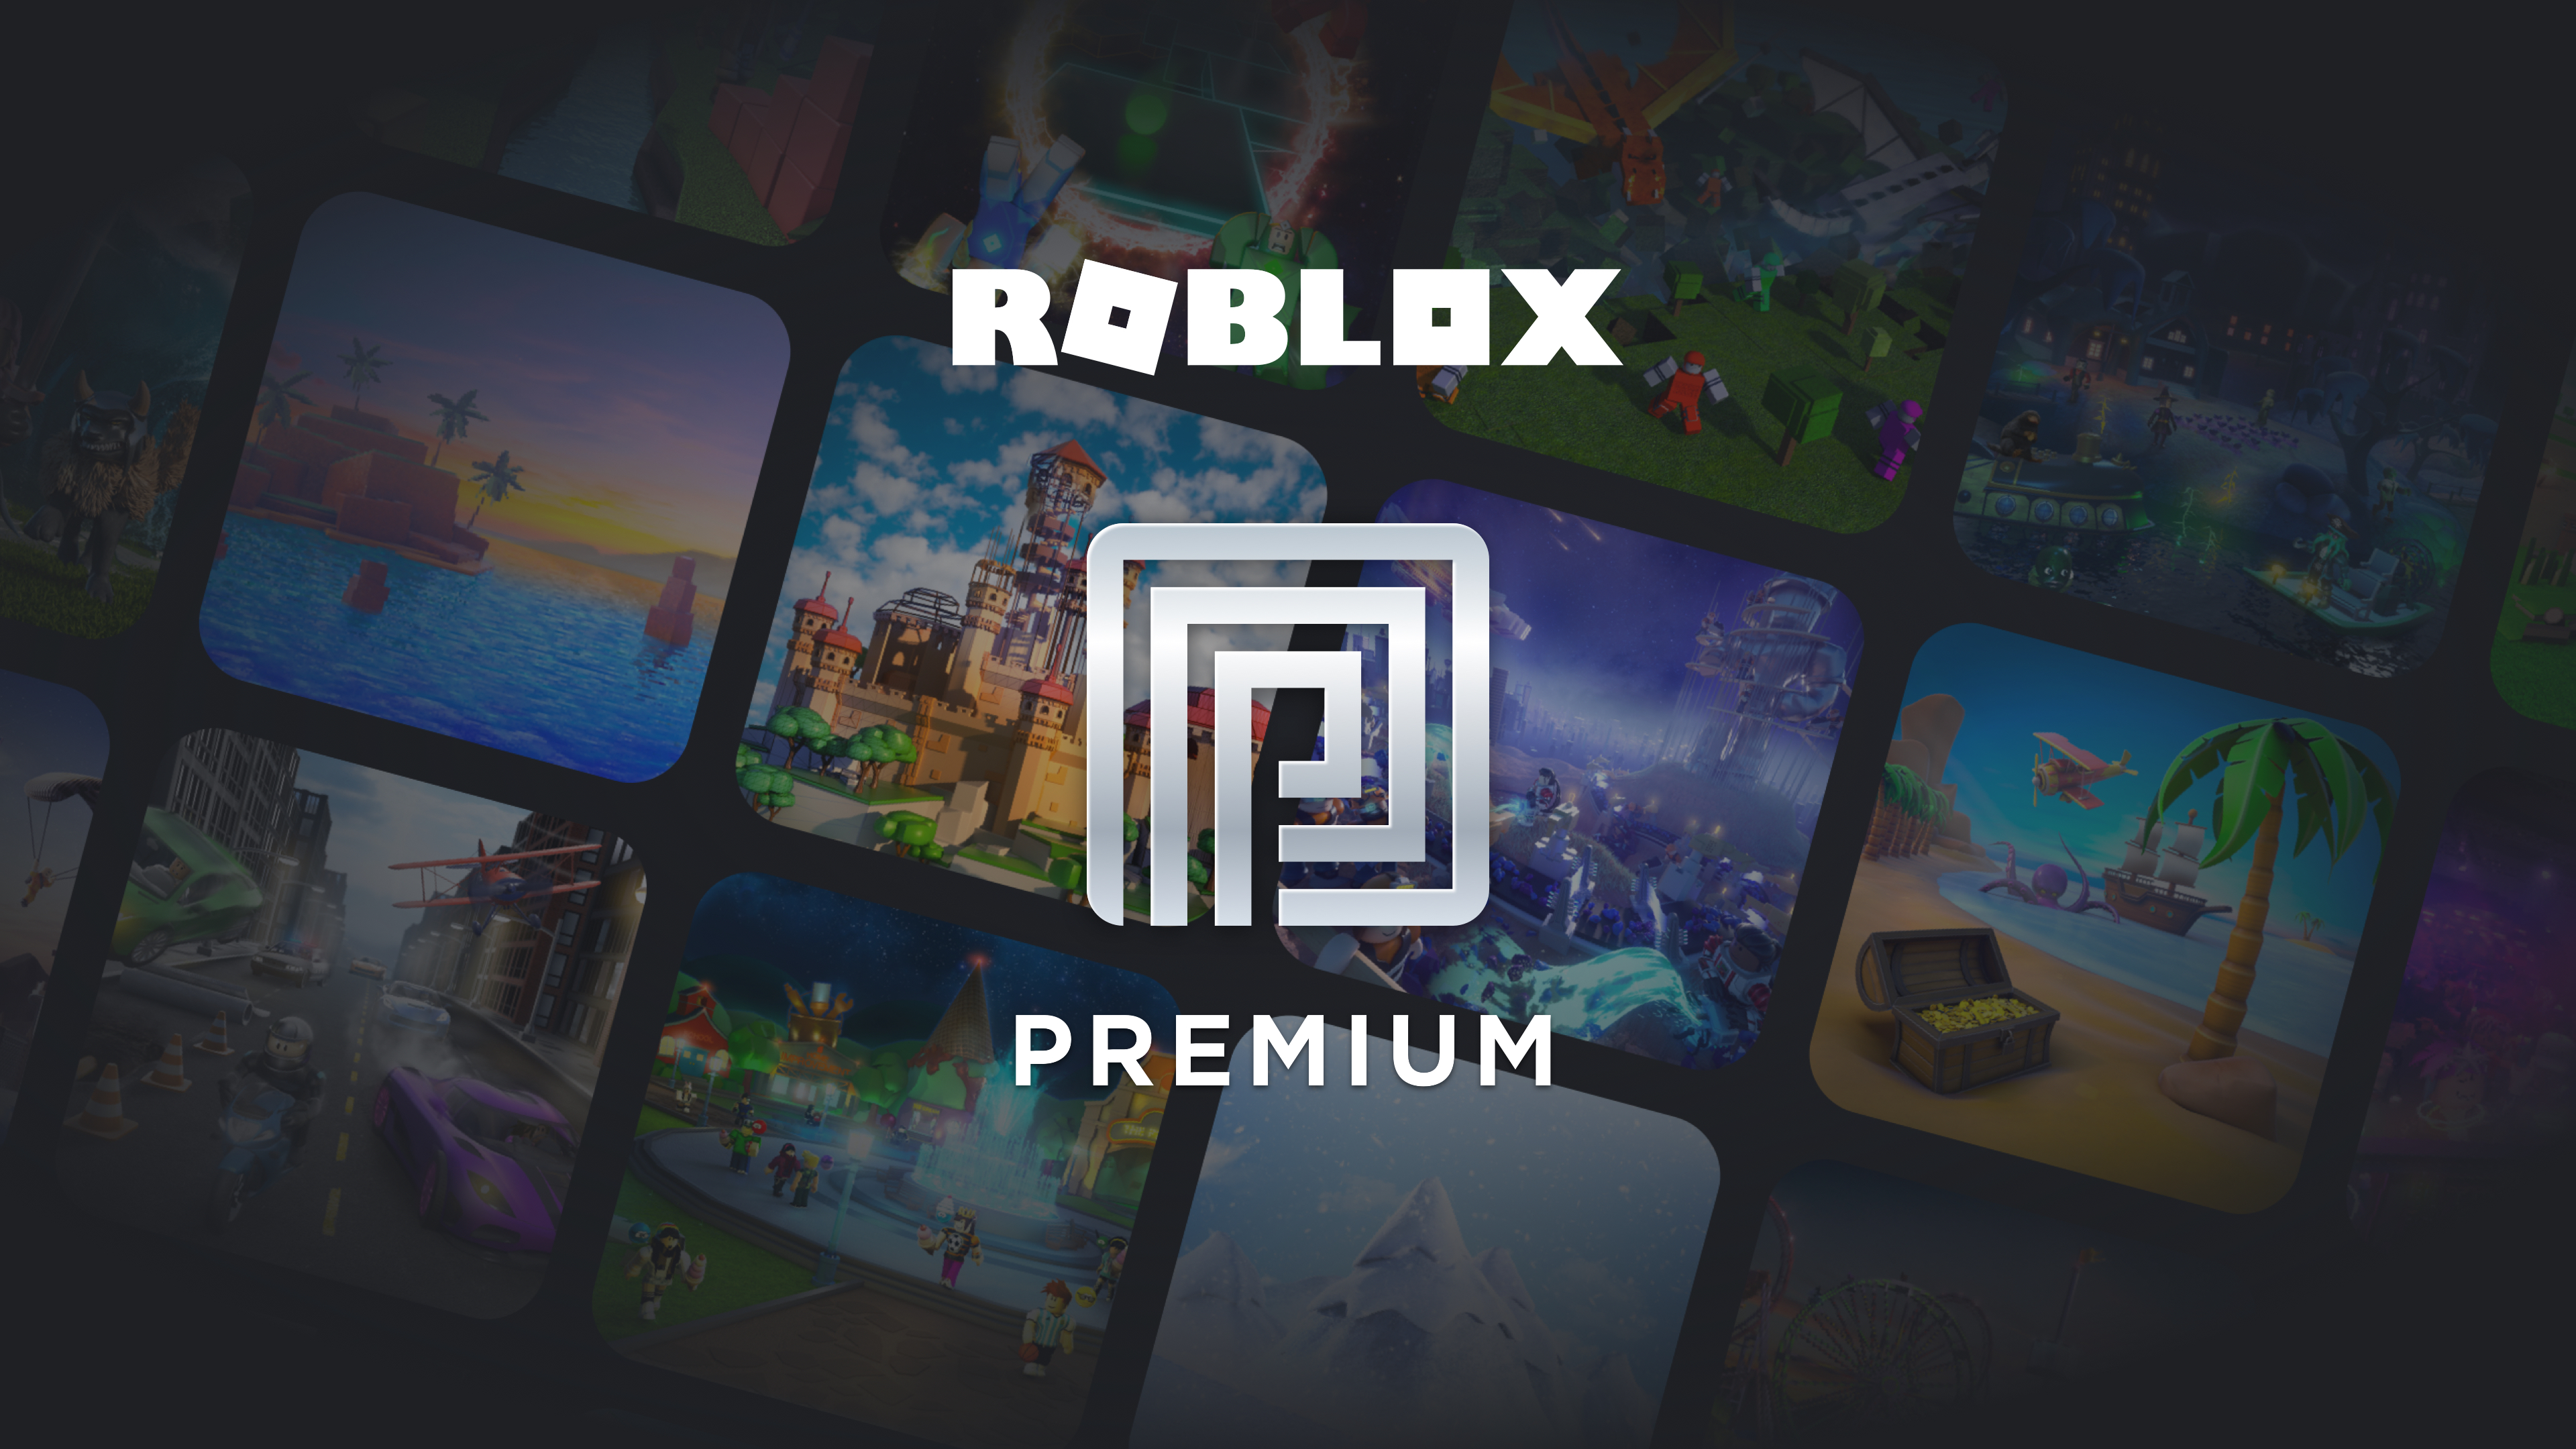 How To Earn Money On Roblox Games